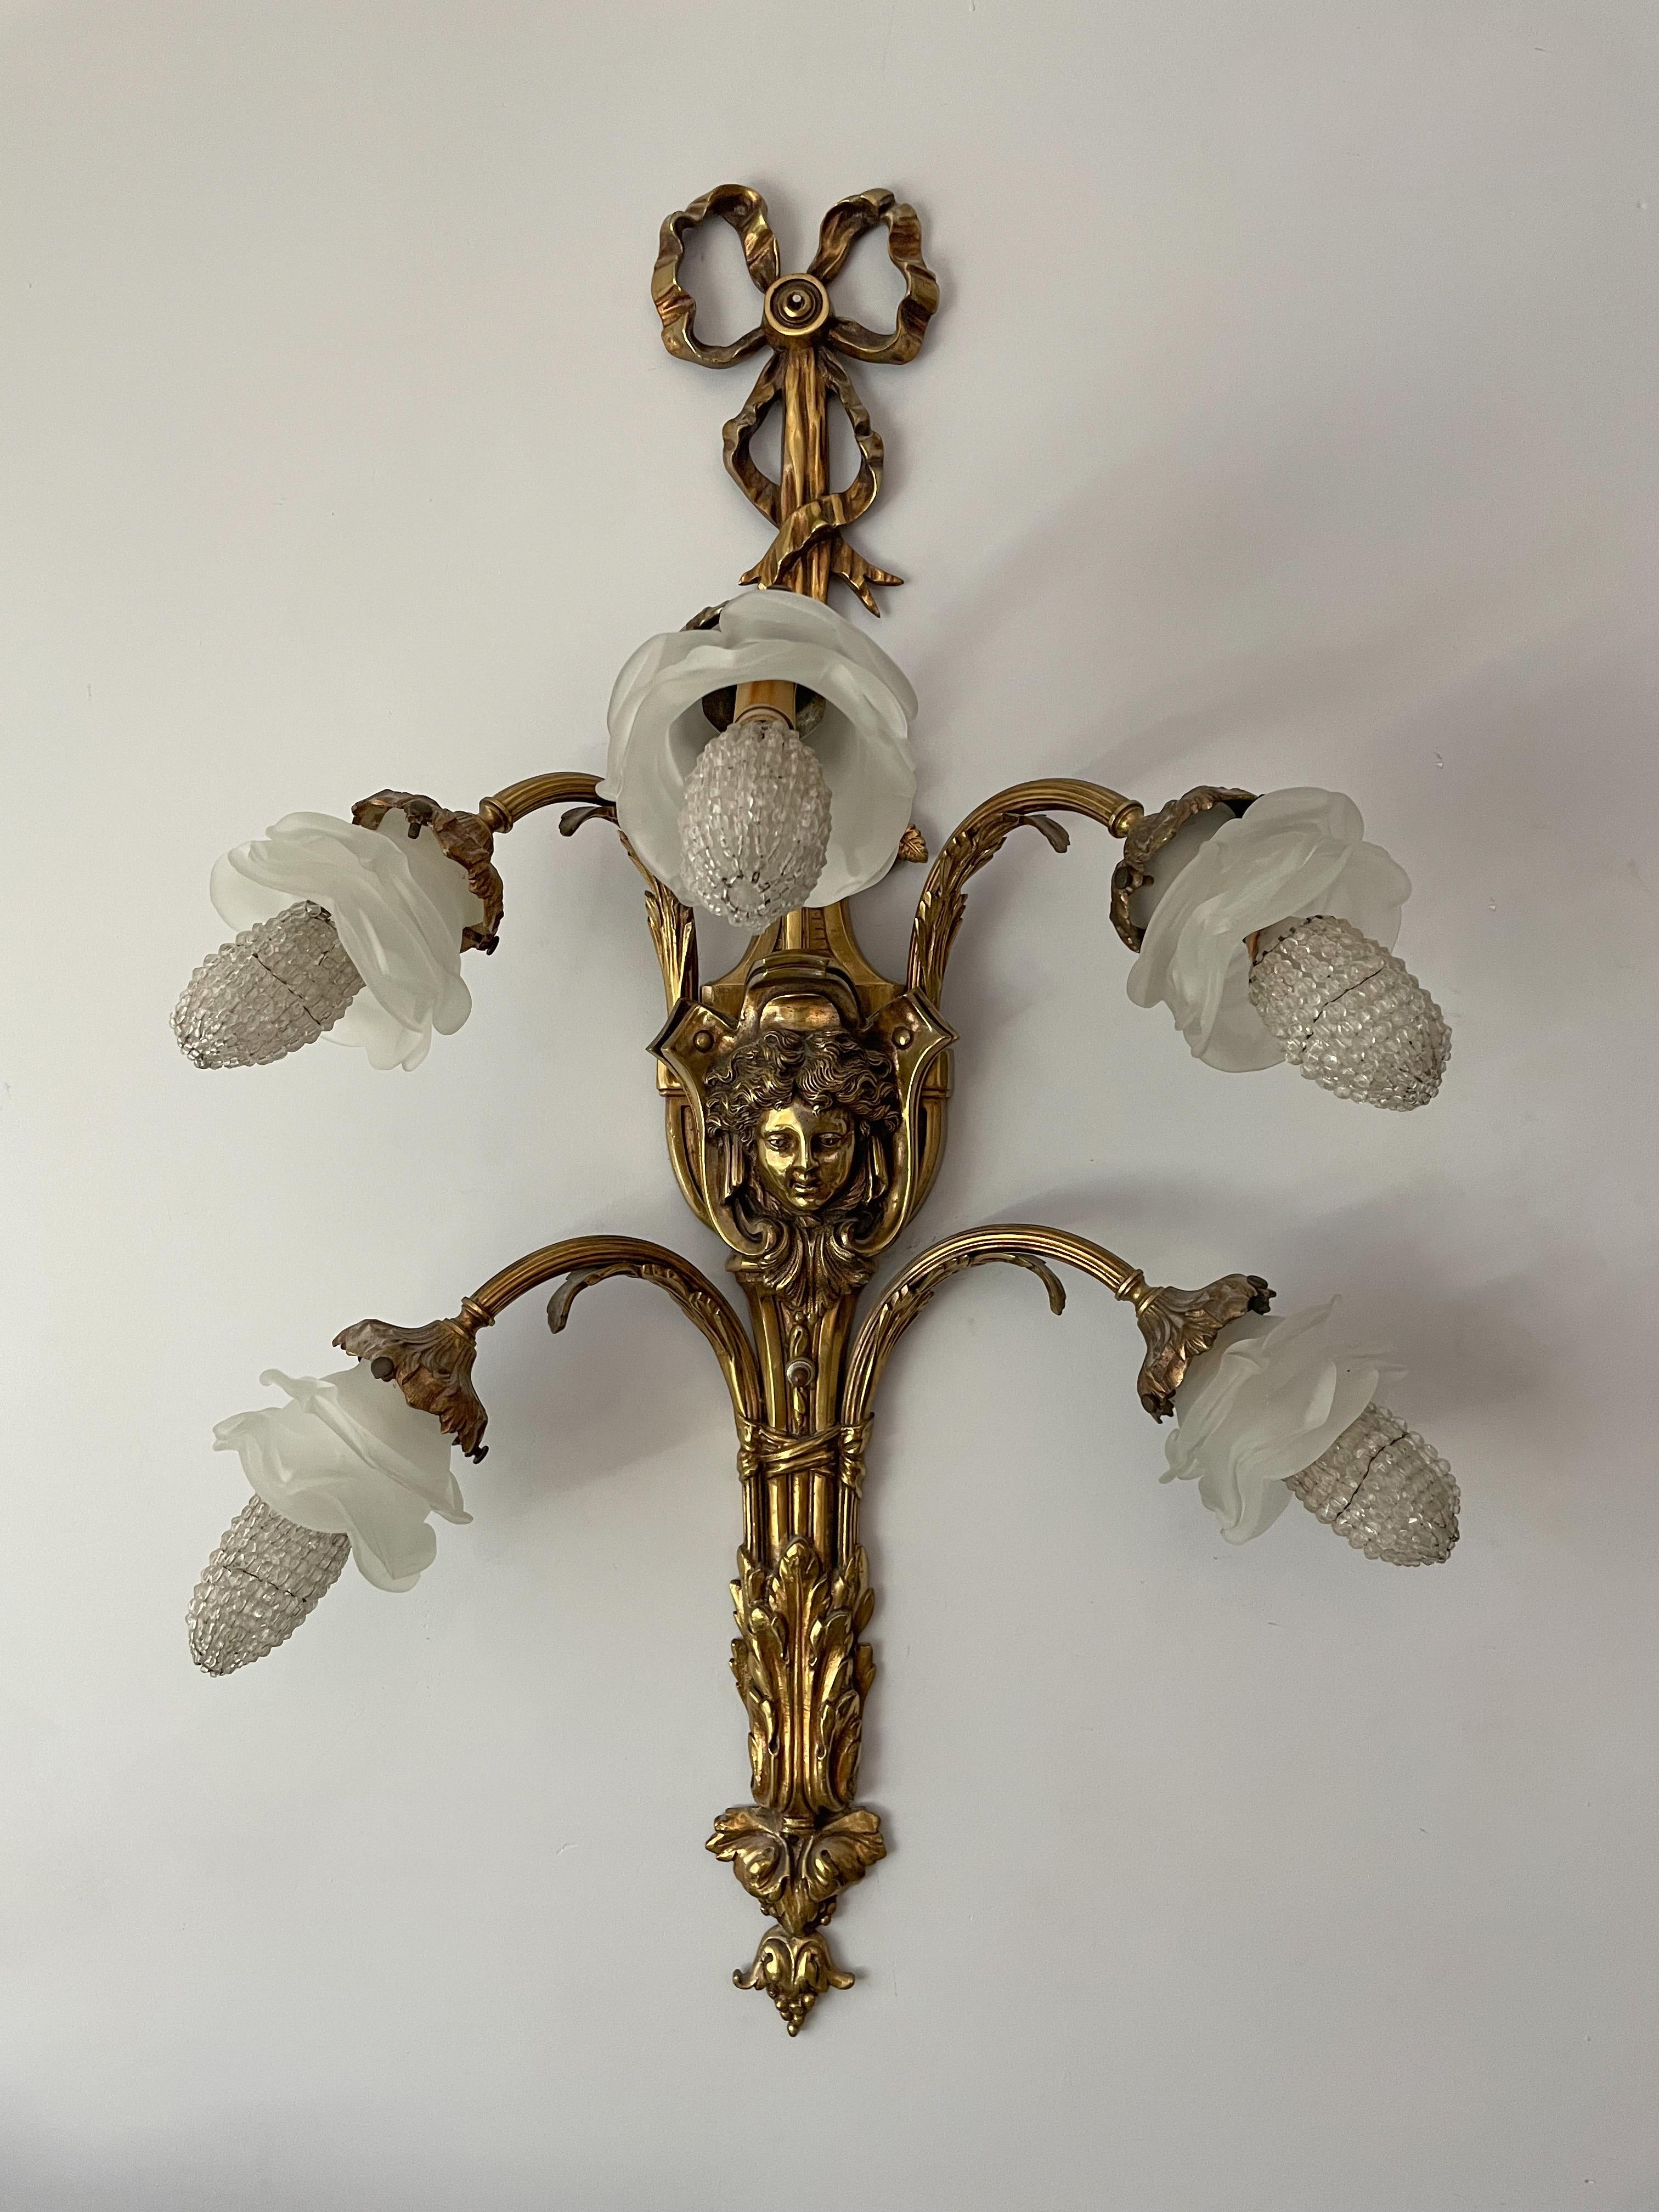 Beautiful, French Louis XV-style bronze ormolu sconce with frosted glass shades.

The sconce consists of finely detailed bronze ormolu frame with frosted glass shades in the shape of flowers. Beaded glass bulb covers are included.

The sconce is